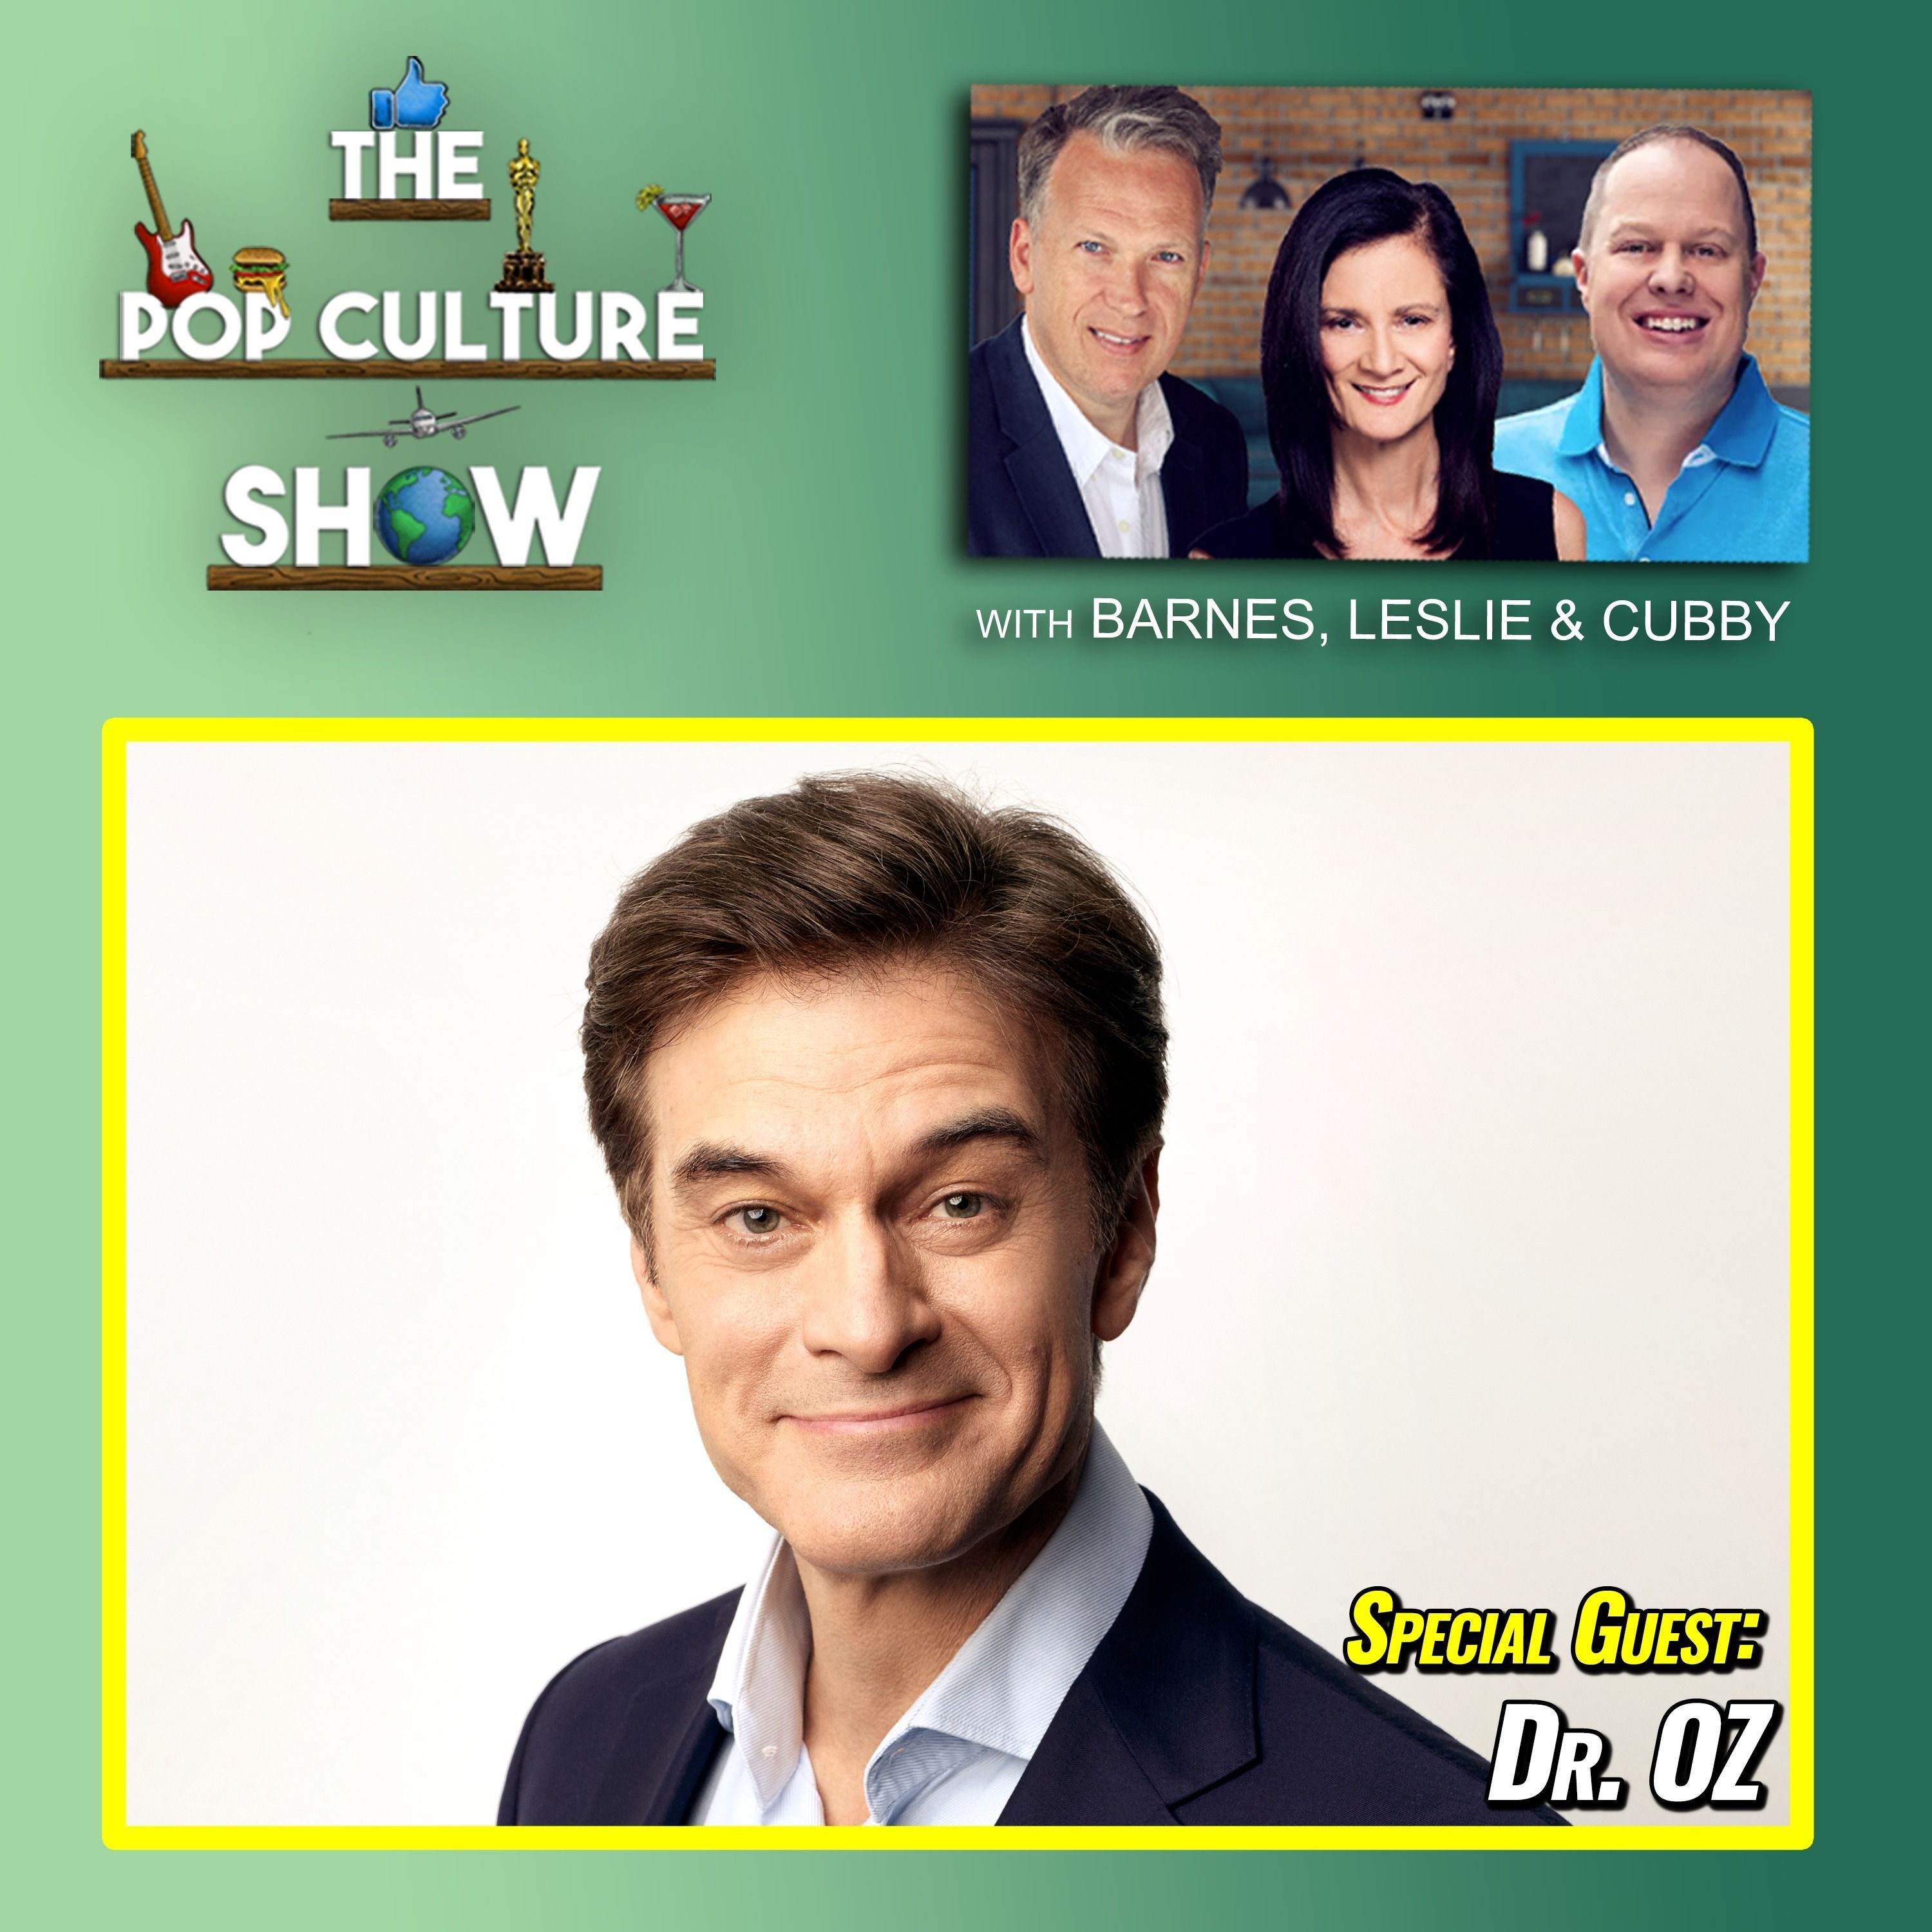 Dr. Oz Exclusive Interview + Celebrity Sleaze + Show Outtakes Image